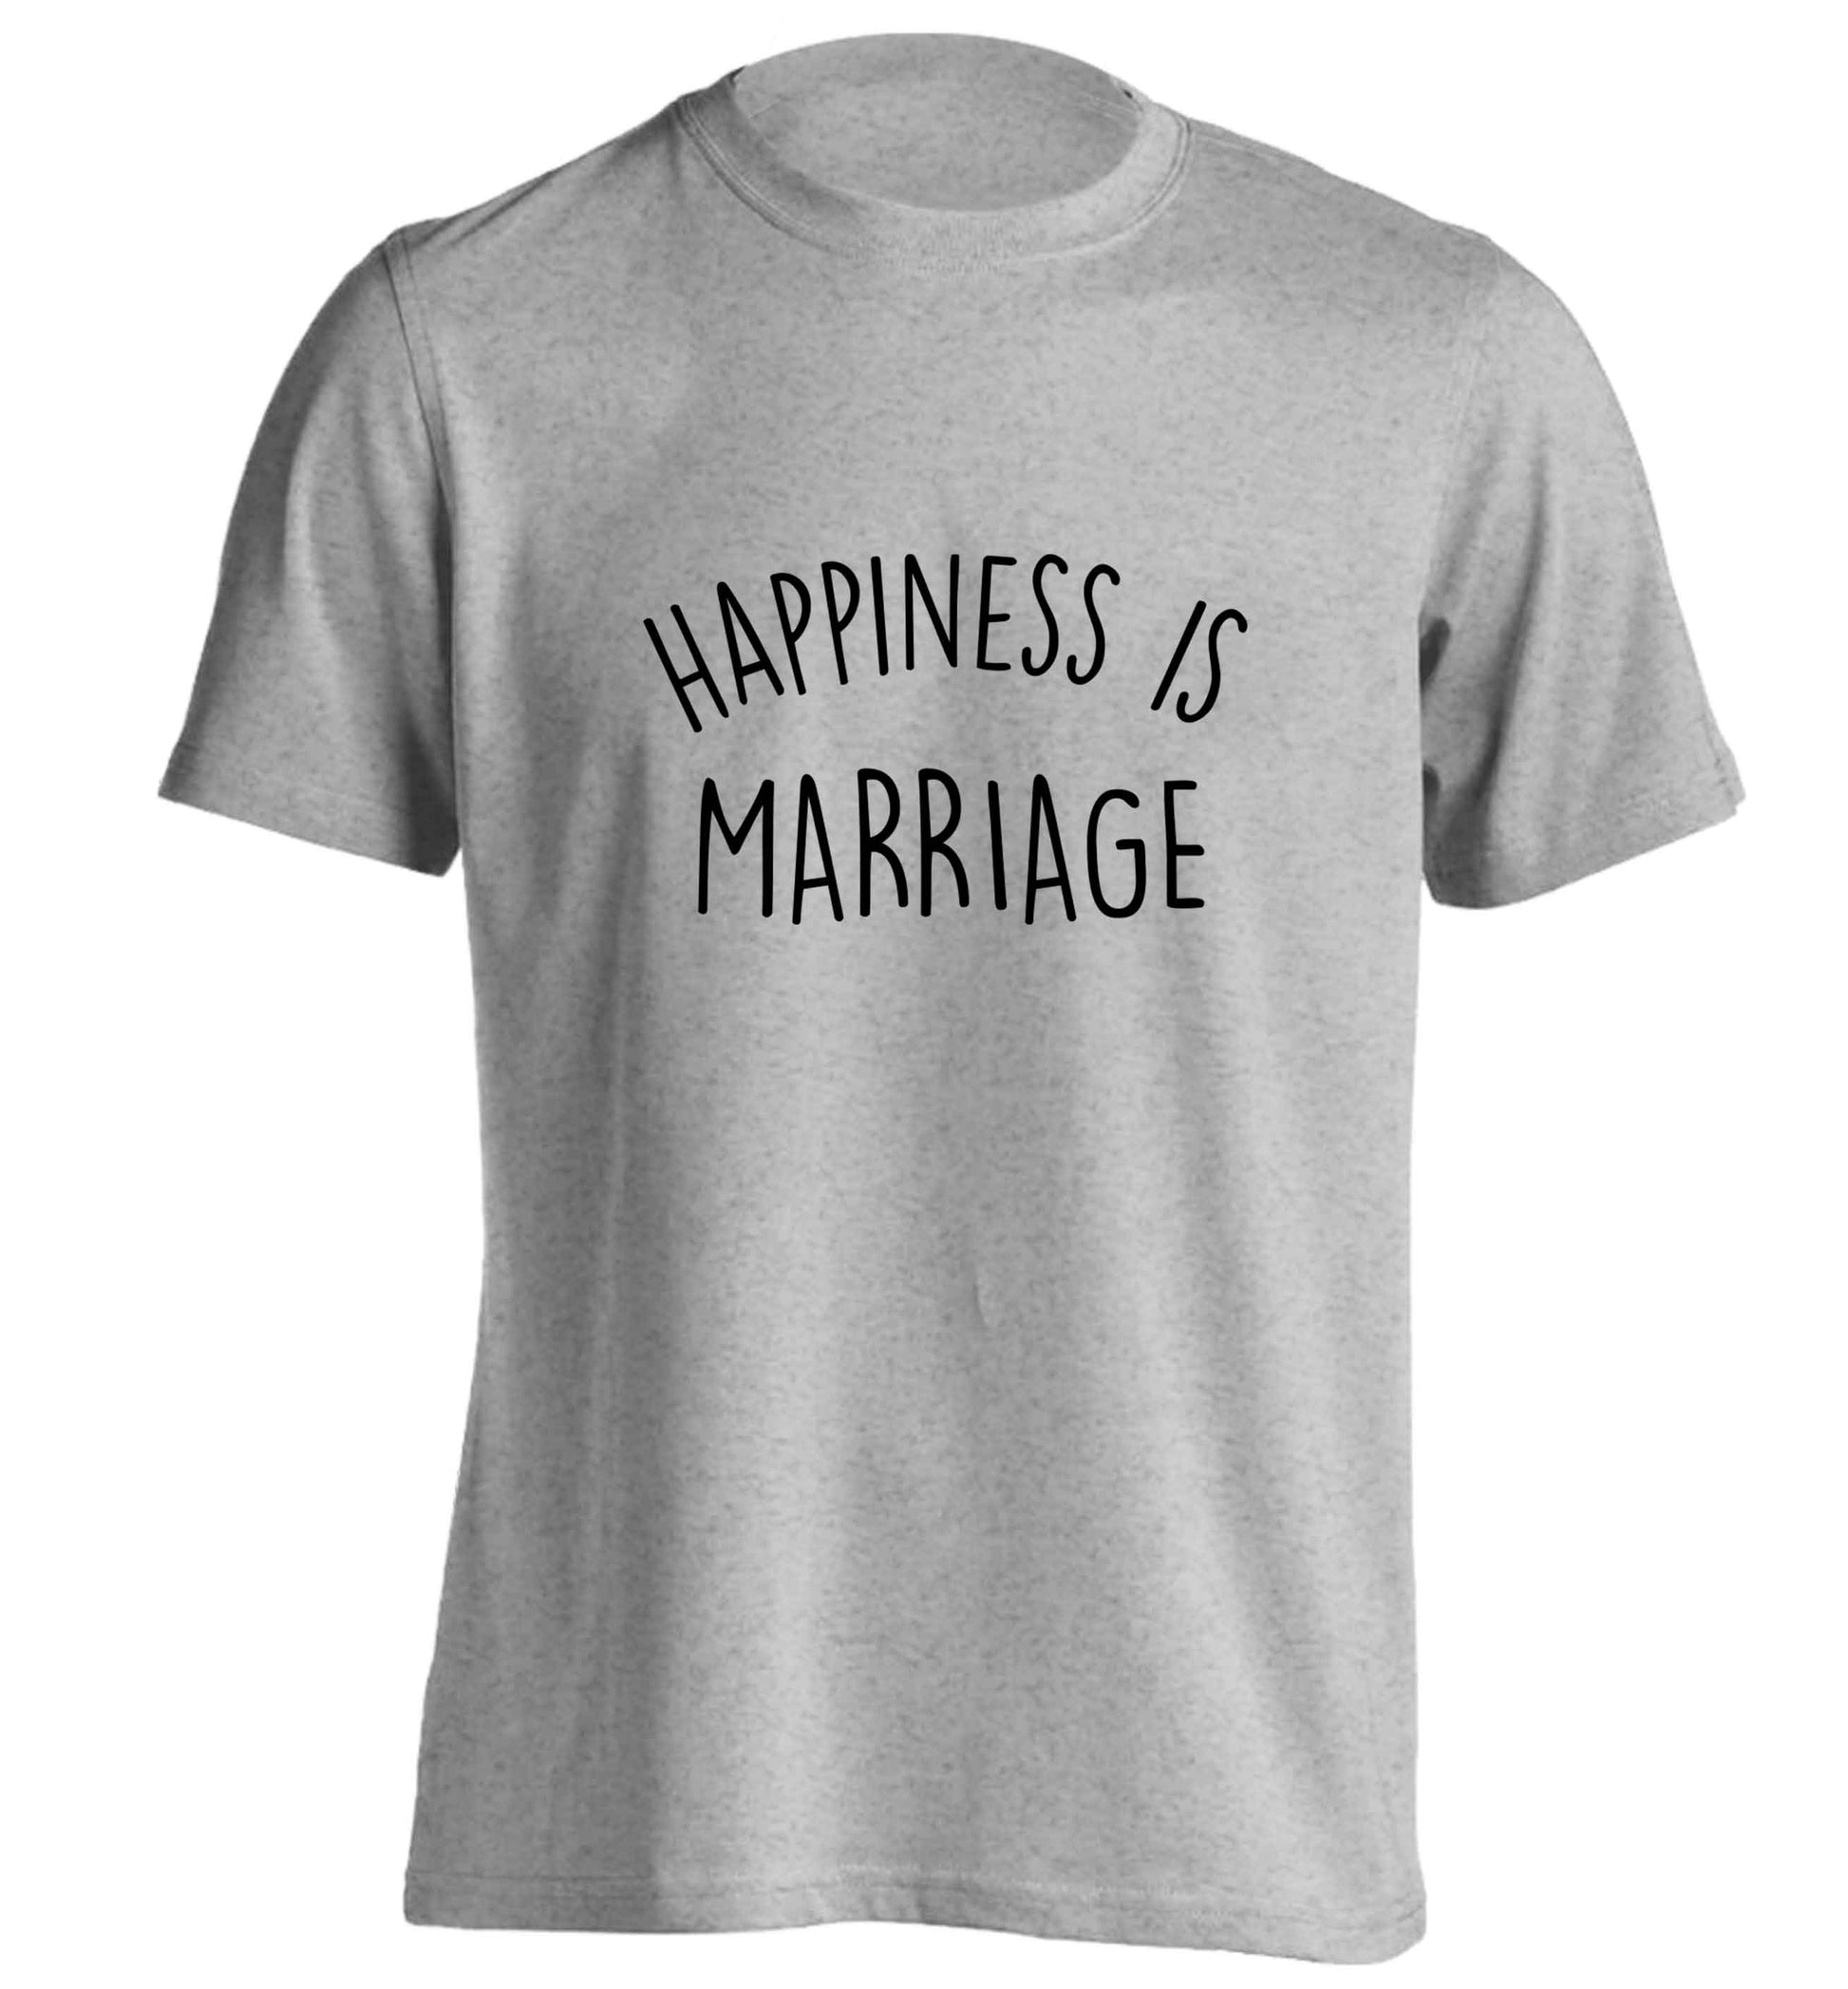 Happiness is marriage adults unisex grey Tshirt 2XL